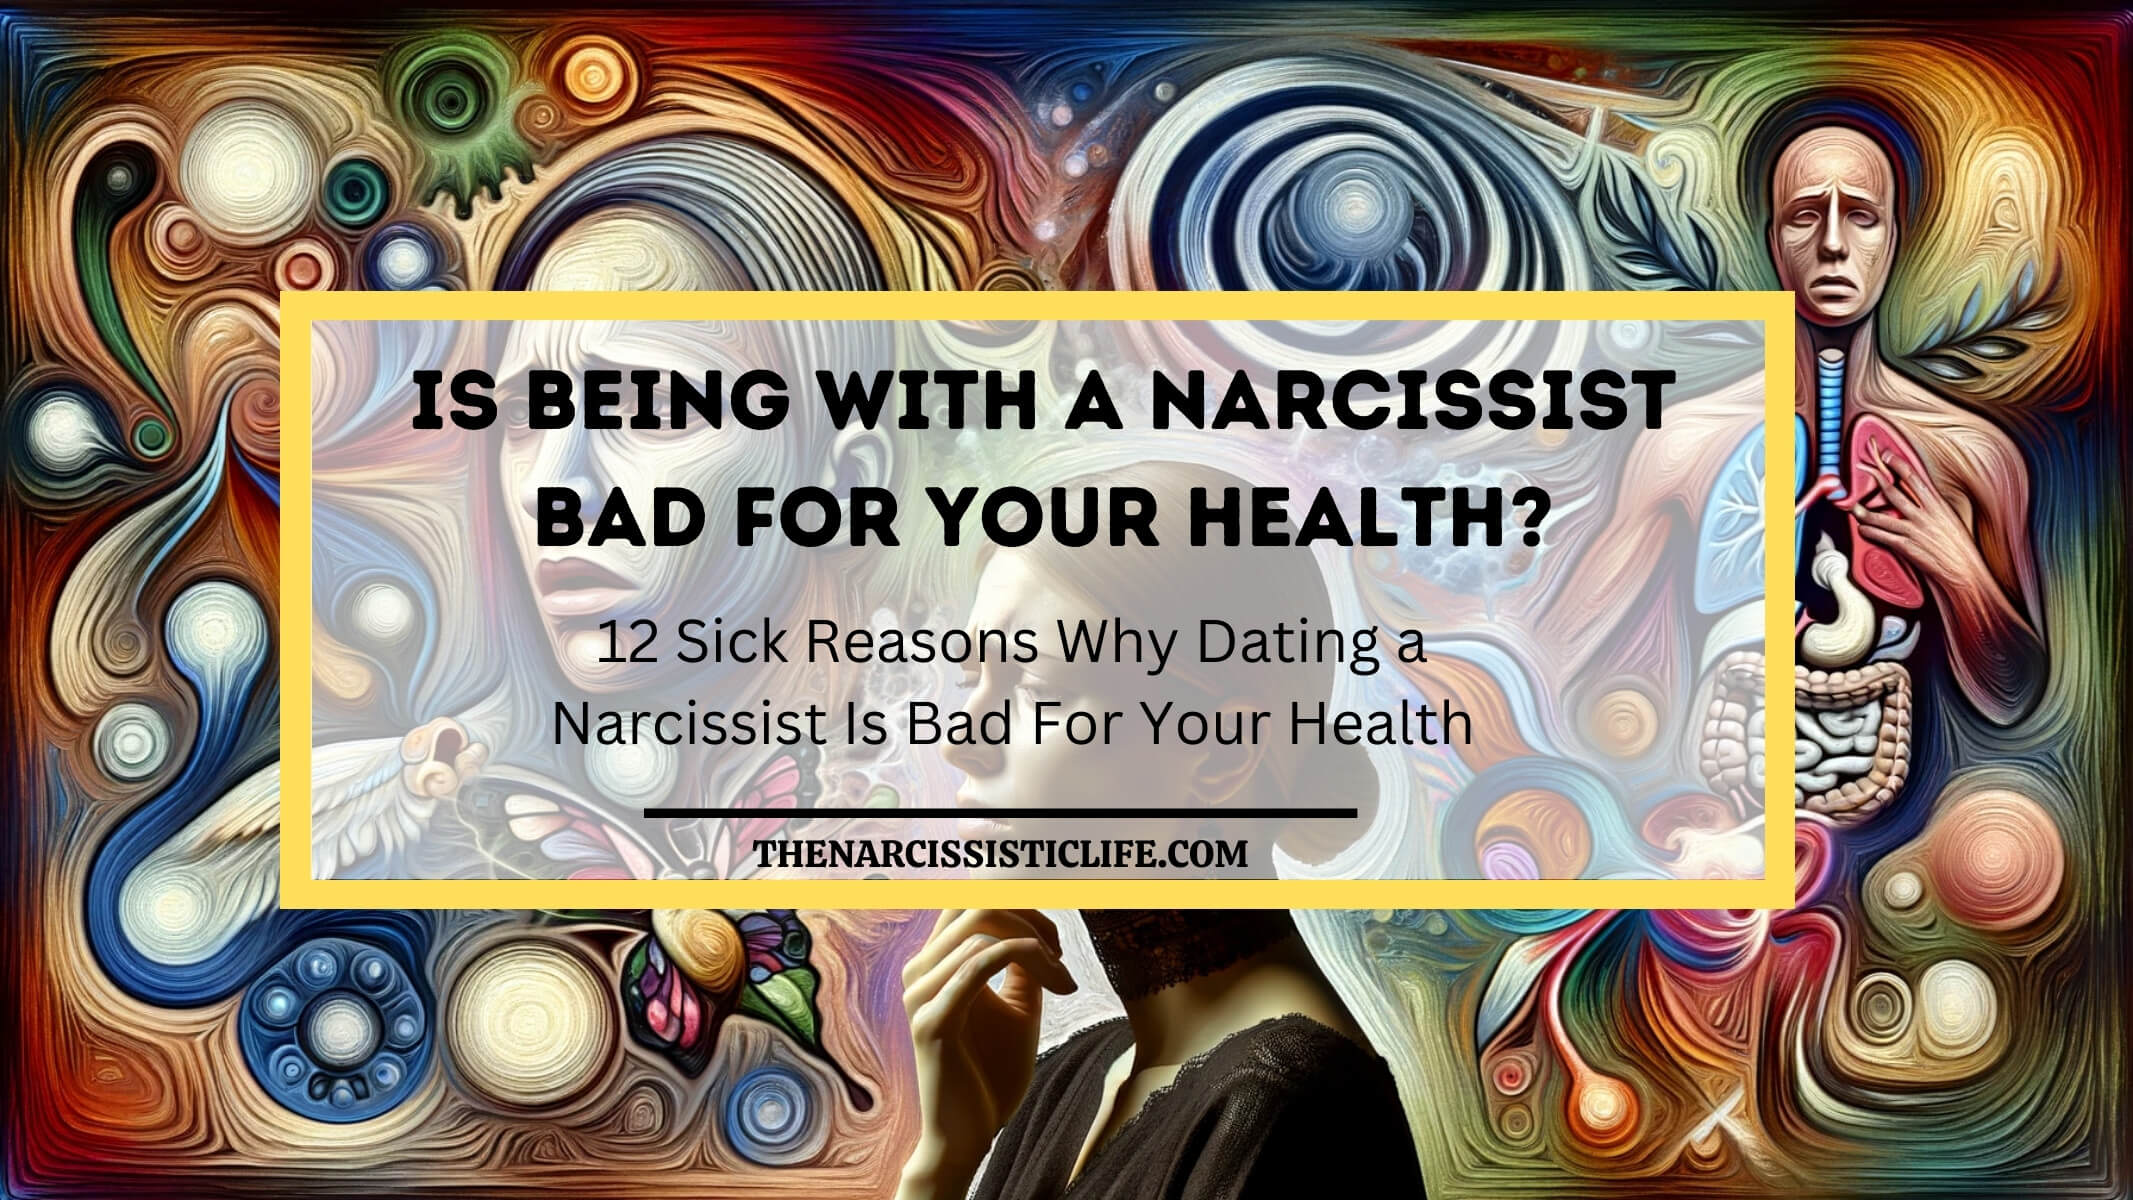 is being with a narcissist bad for your health?